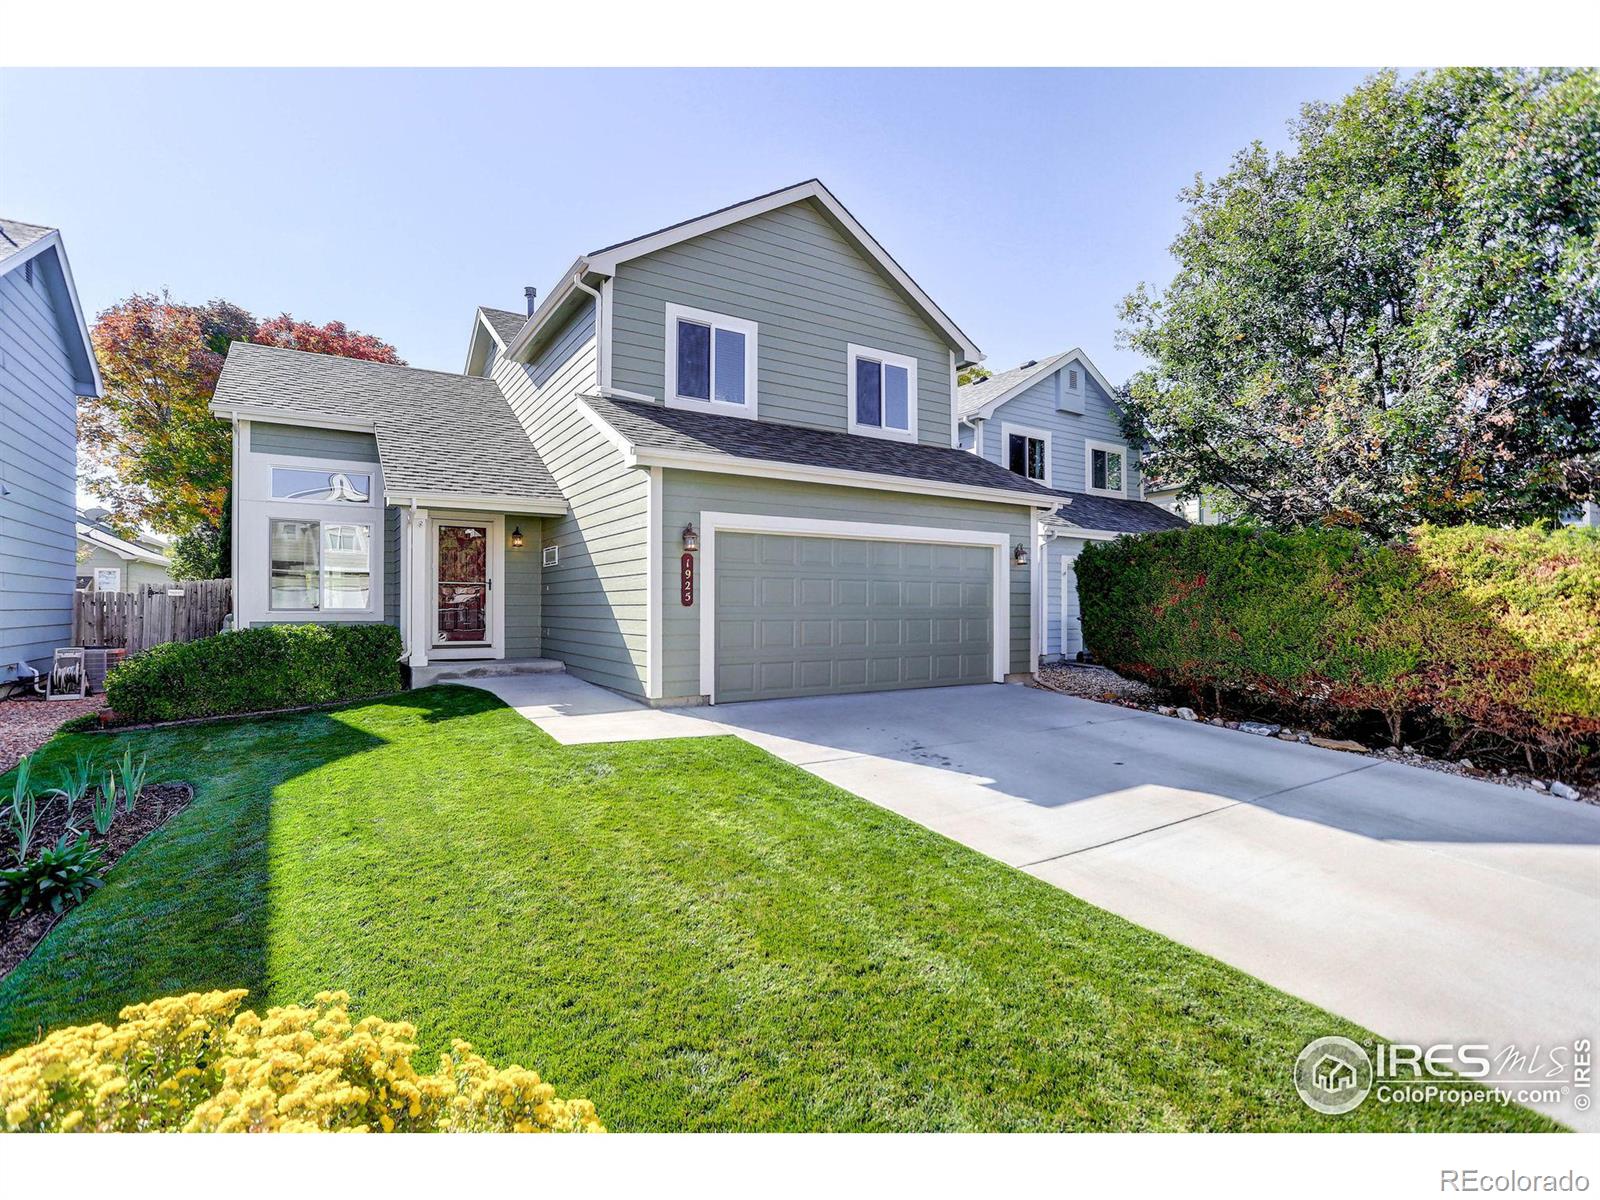 1925  Unity Court, fort collins MLS: 456789998378 Beds: 4 Baths: 4 Price: $550,000